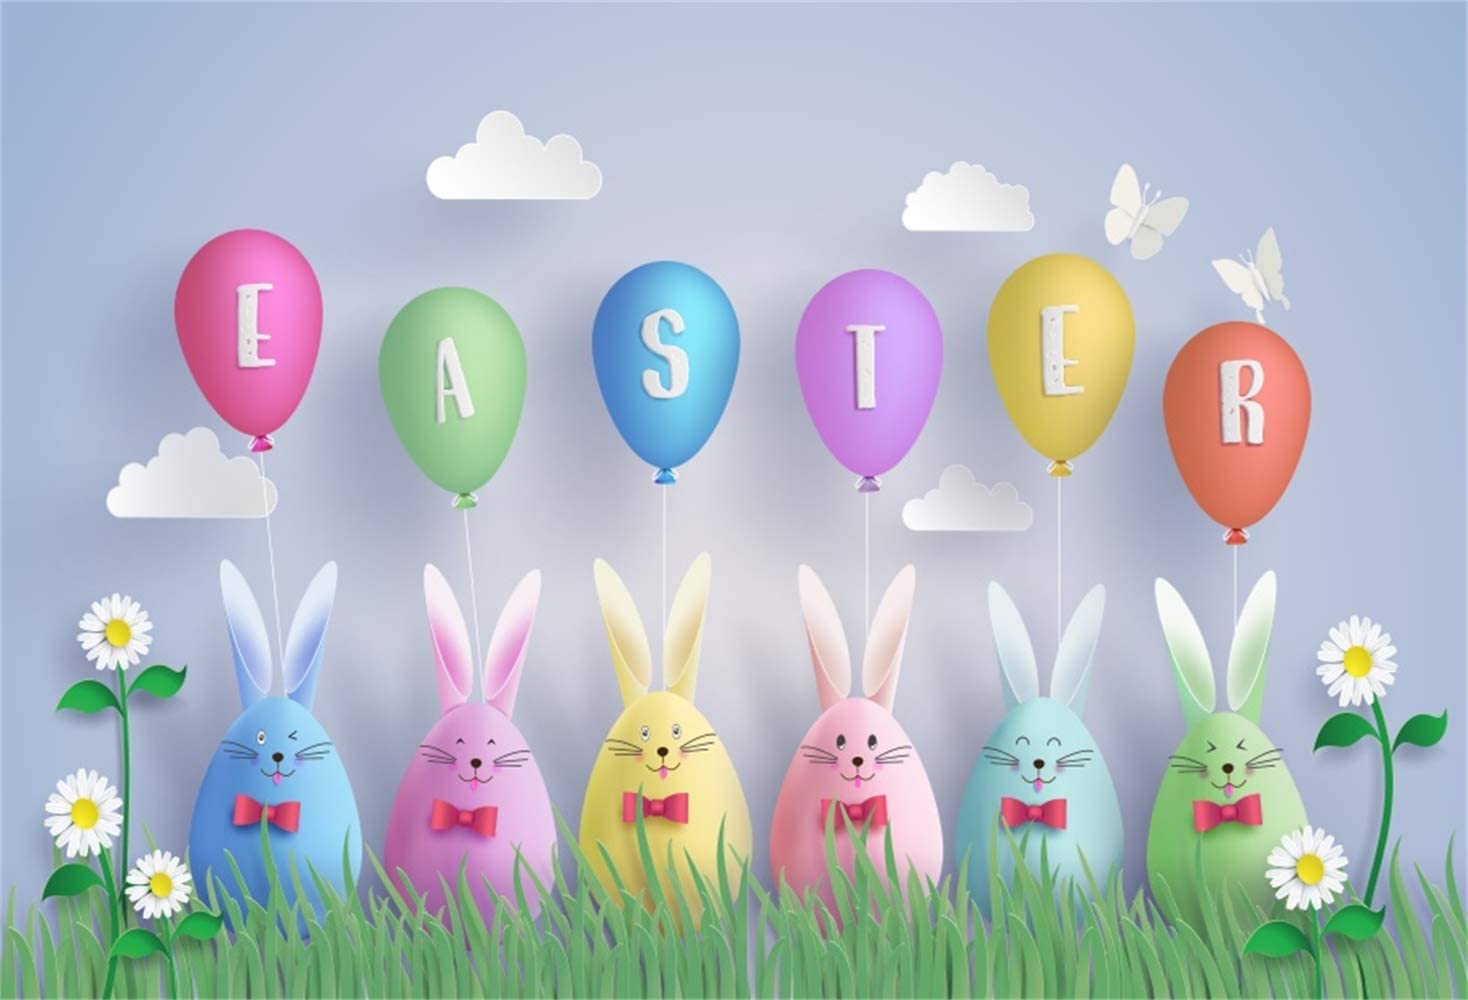 Amazon.com, Laeacco Easter Theme 5x3ft Vinyl Photography Background Cartoon Cute Easter Eggs Balloons Bunnies Grassland Spring Scenic Backdrop Community Easter Egg Hunt Day Banner Wallpaper, Camera & Photo